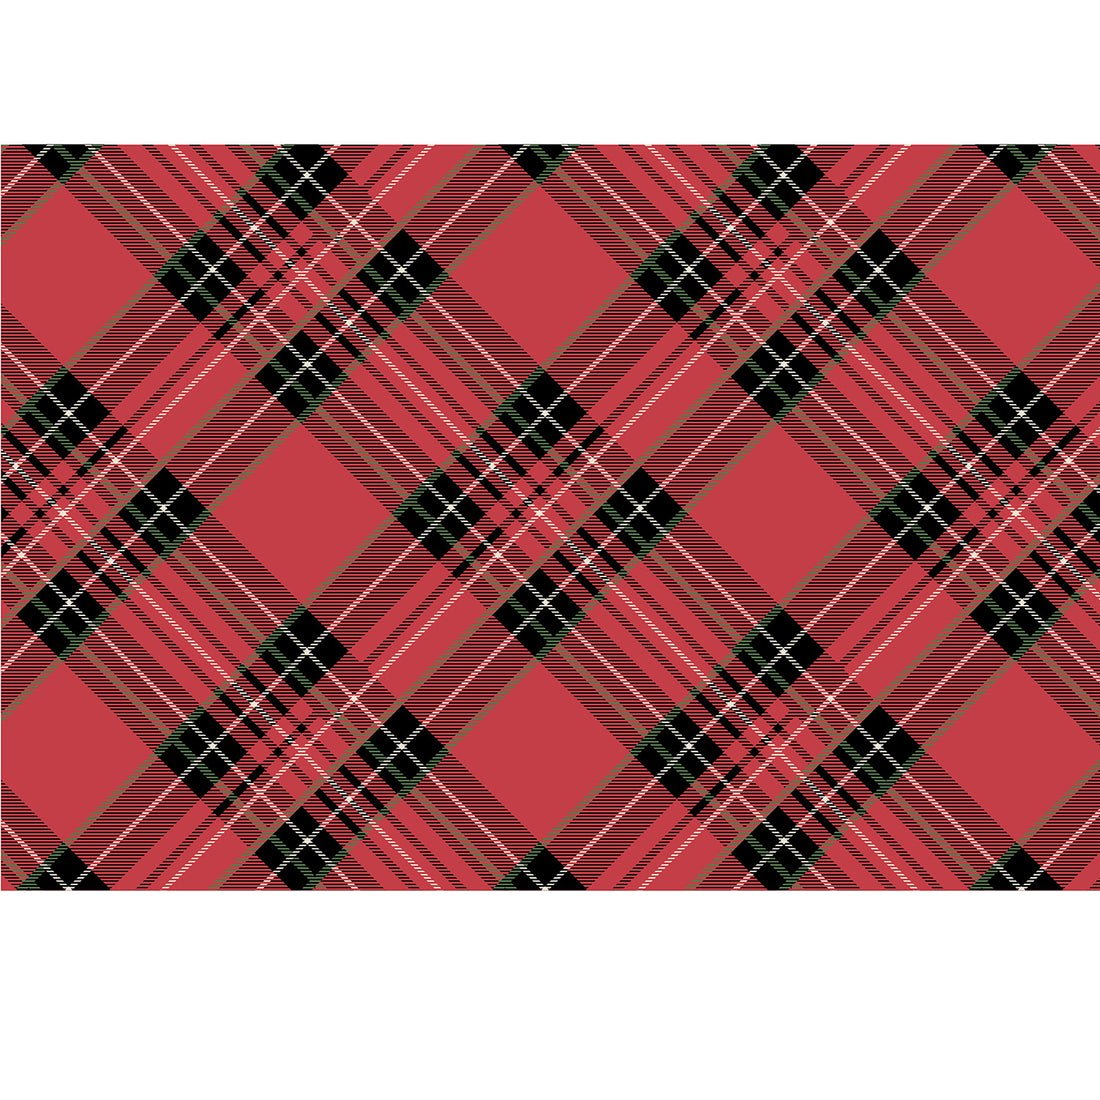 A large-scale diagonal plaid pattern of black, white, gold and green over bright red.